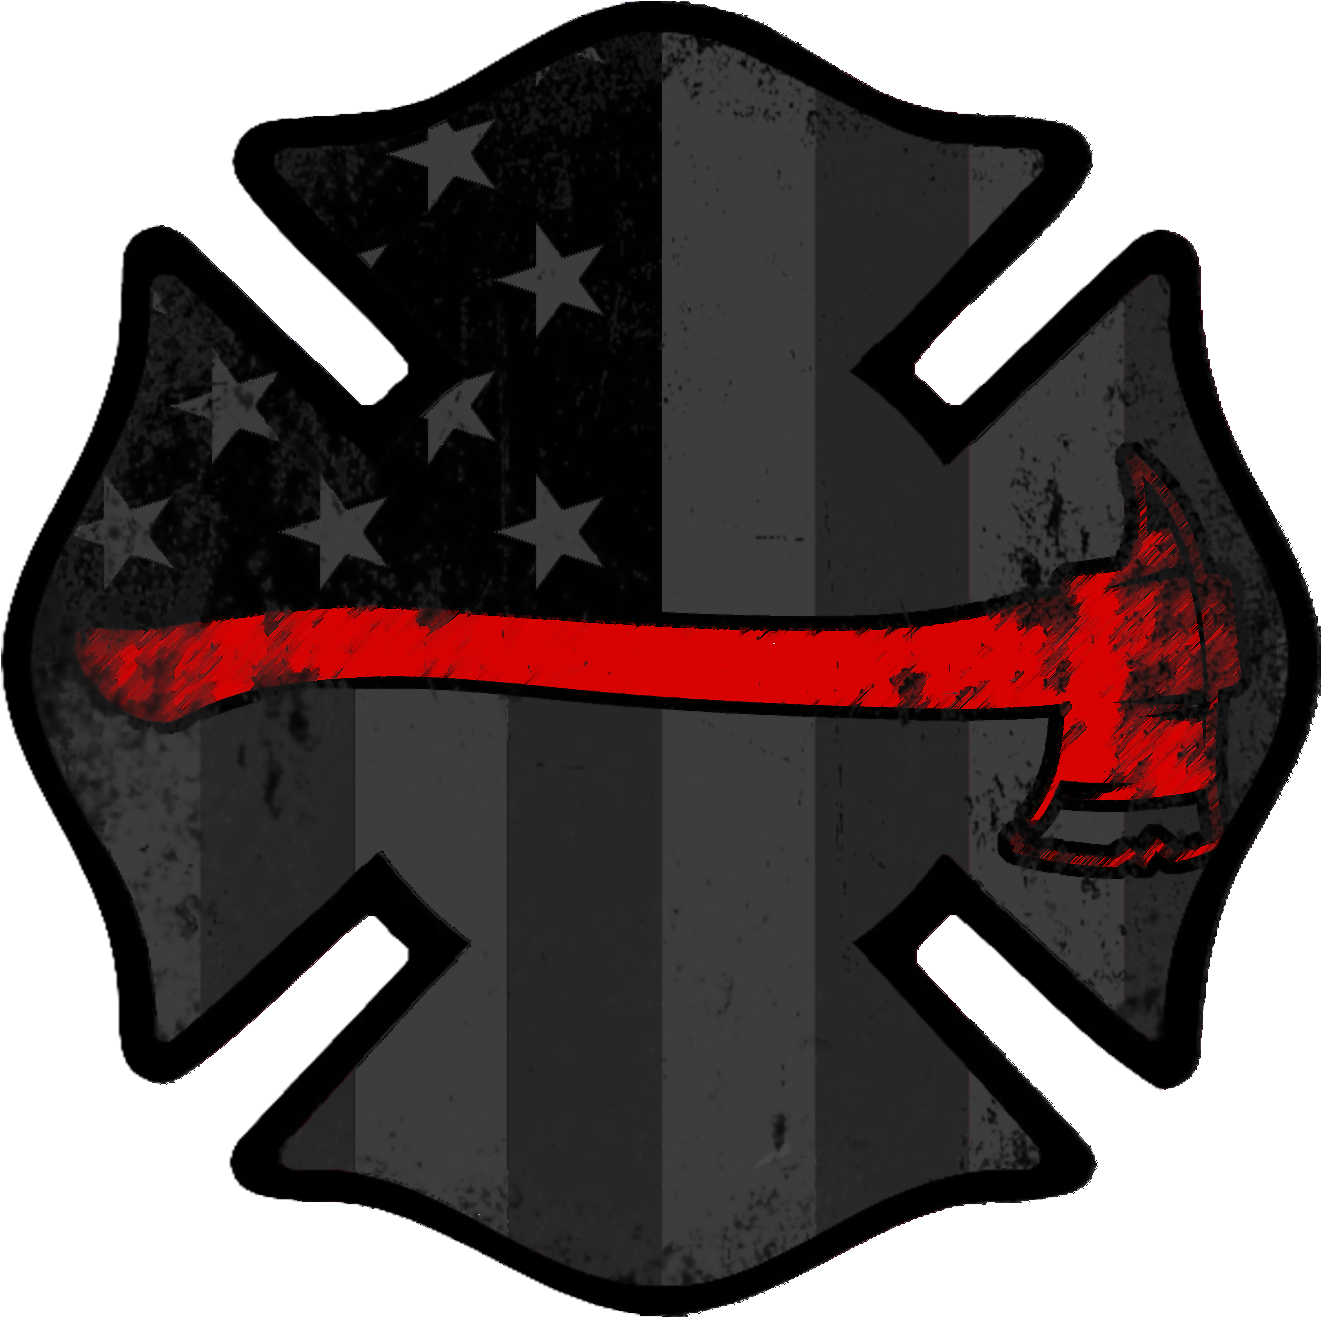 American Axe Subdued Firefighter Decal - Fire Maltese Cross (1368x1368)